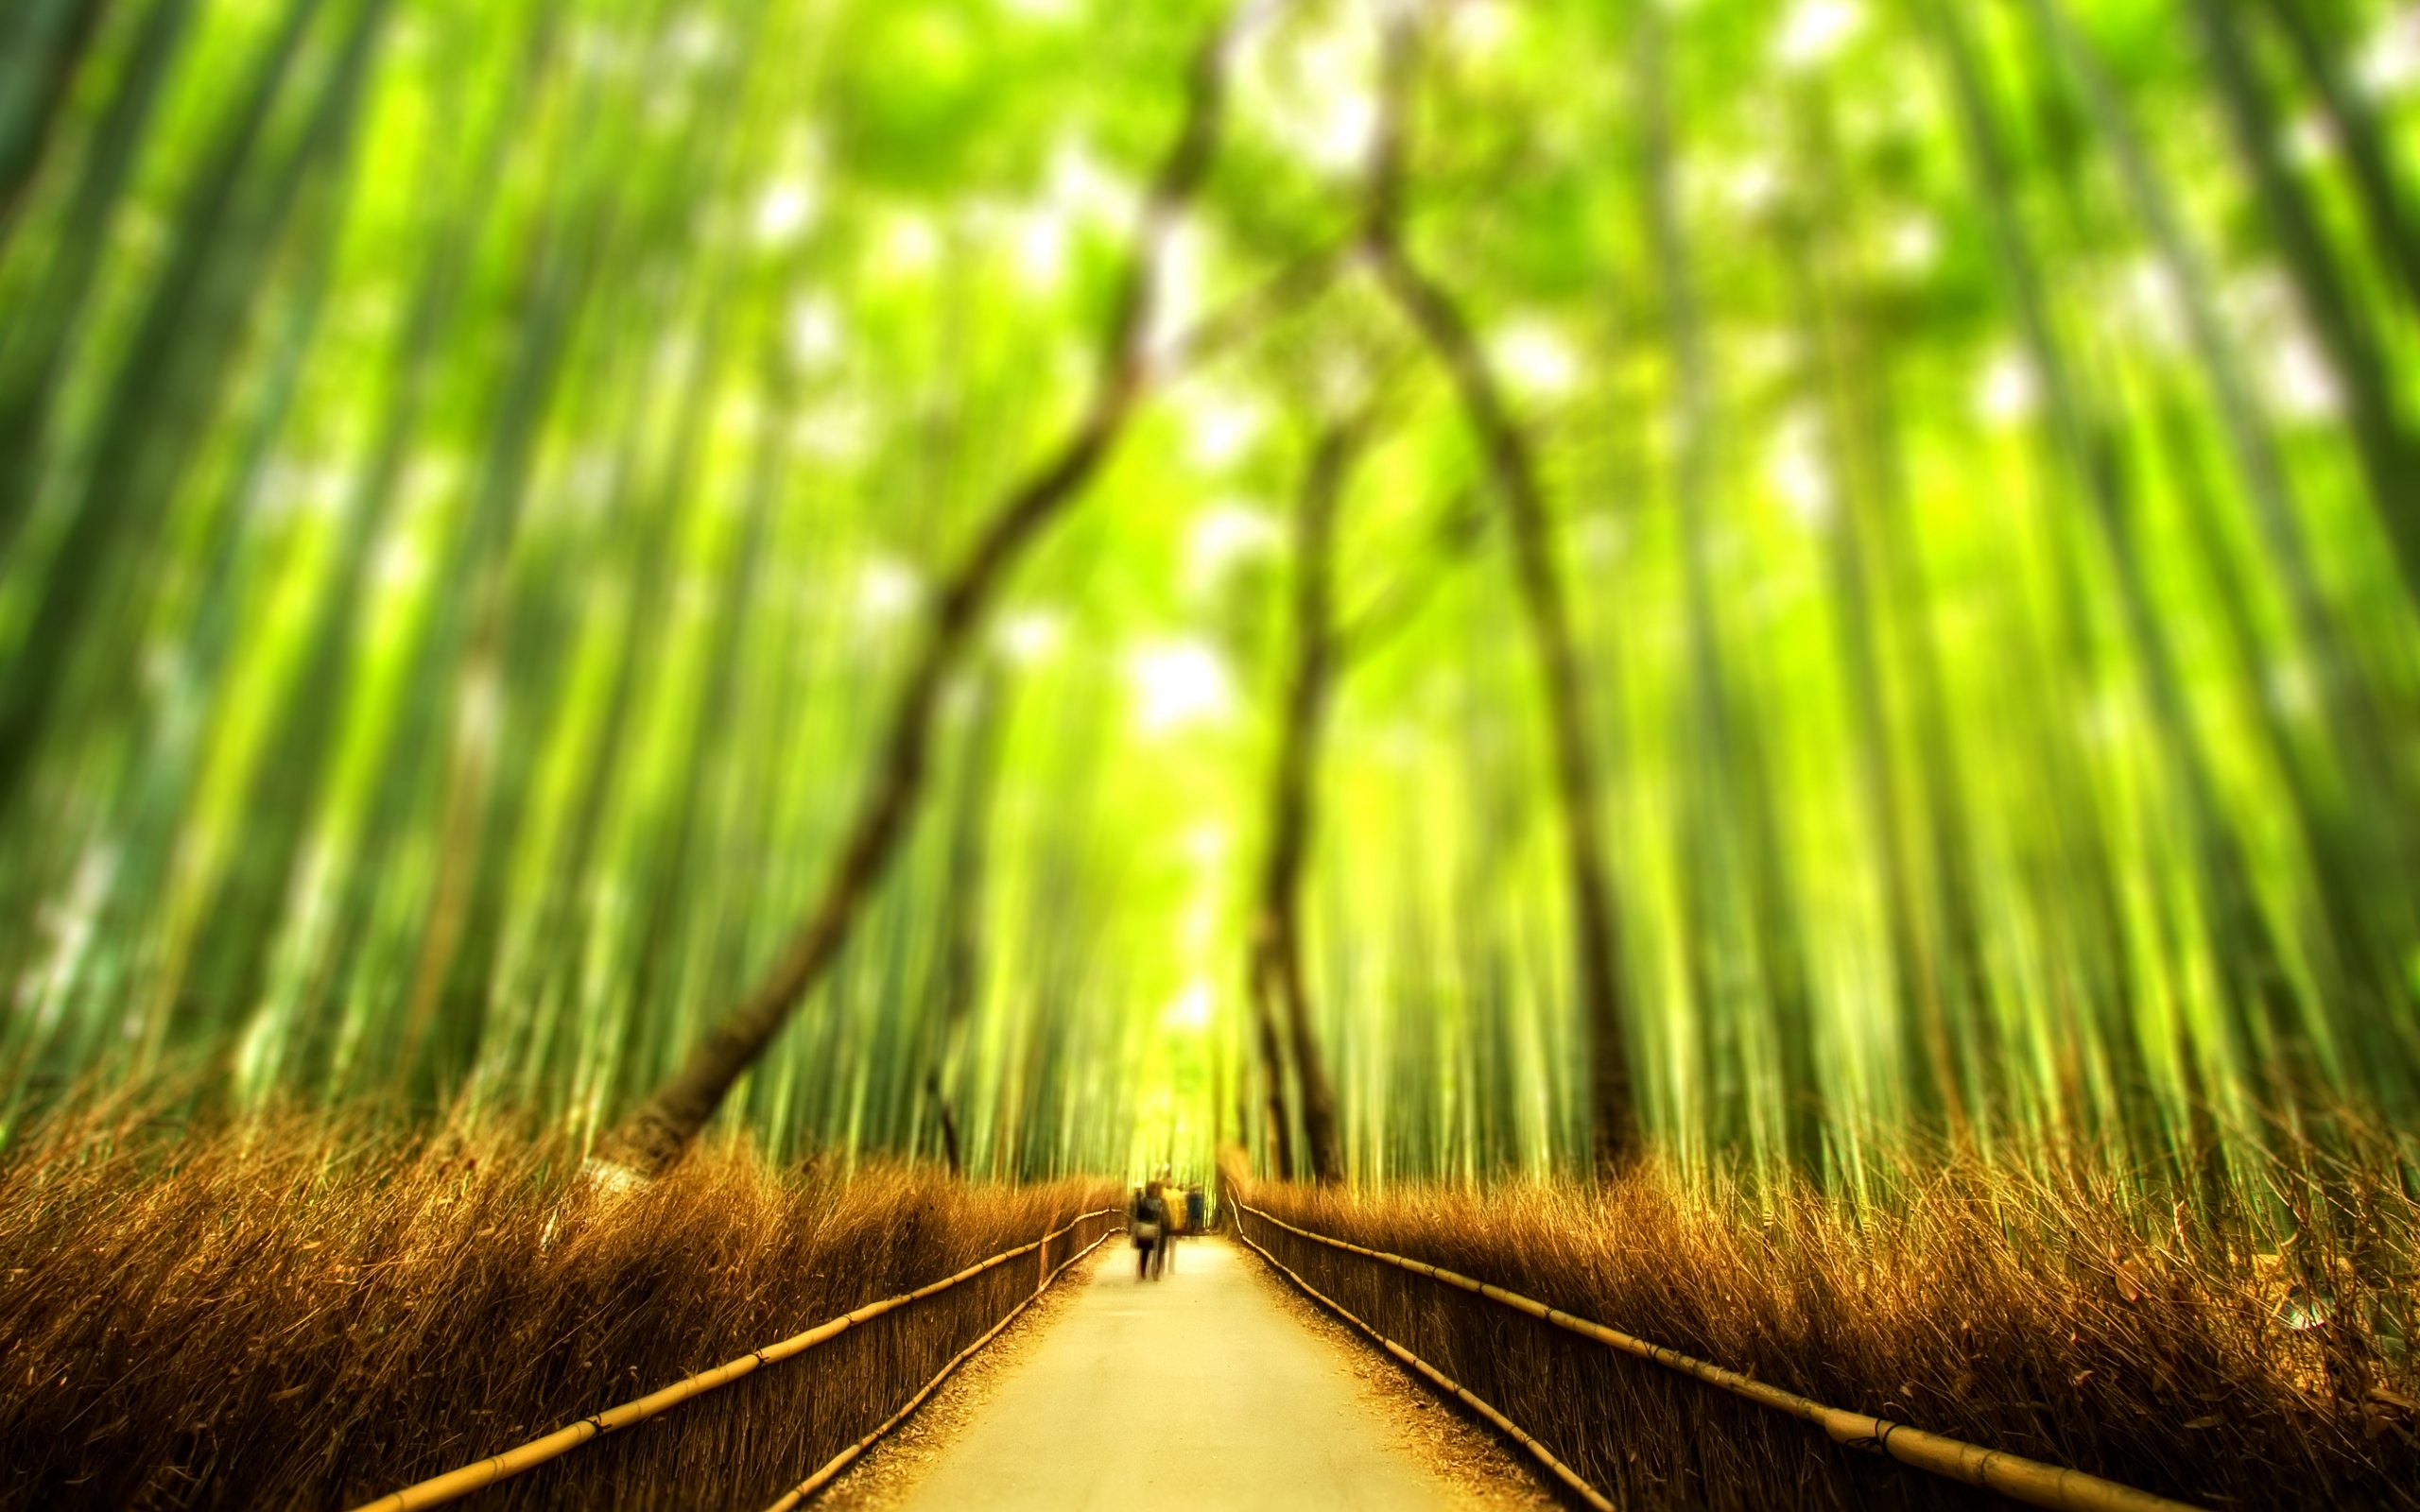 On October By Stephen Ments Off Bamboo Forest Wallpaper